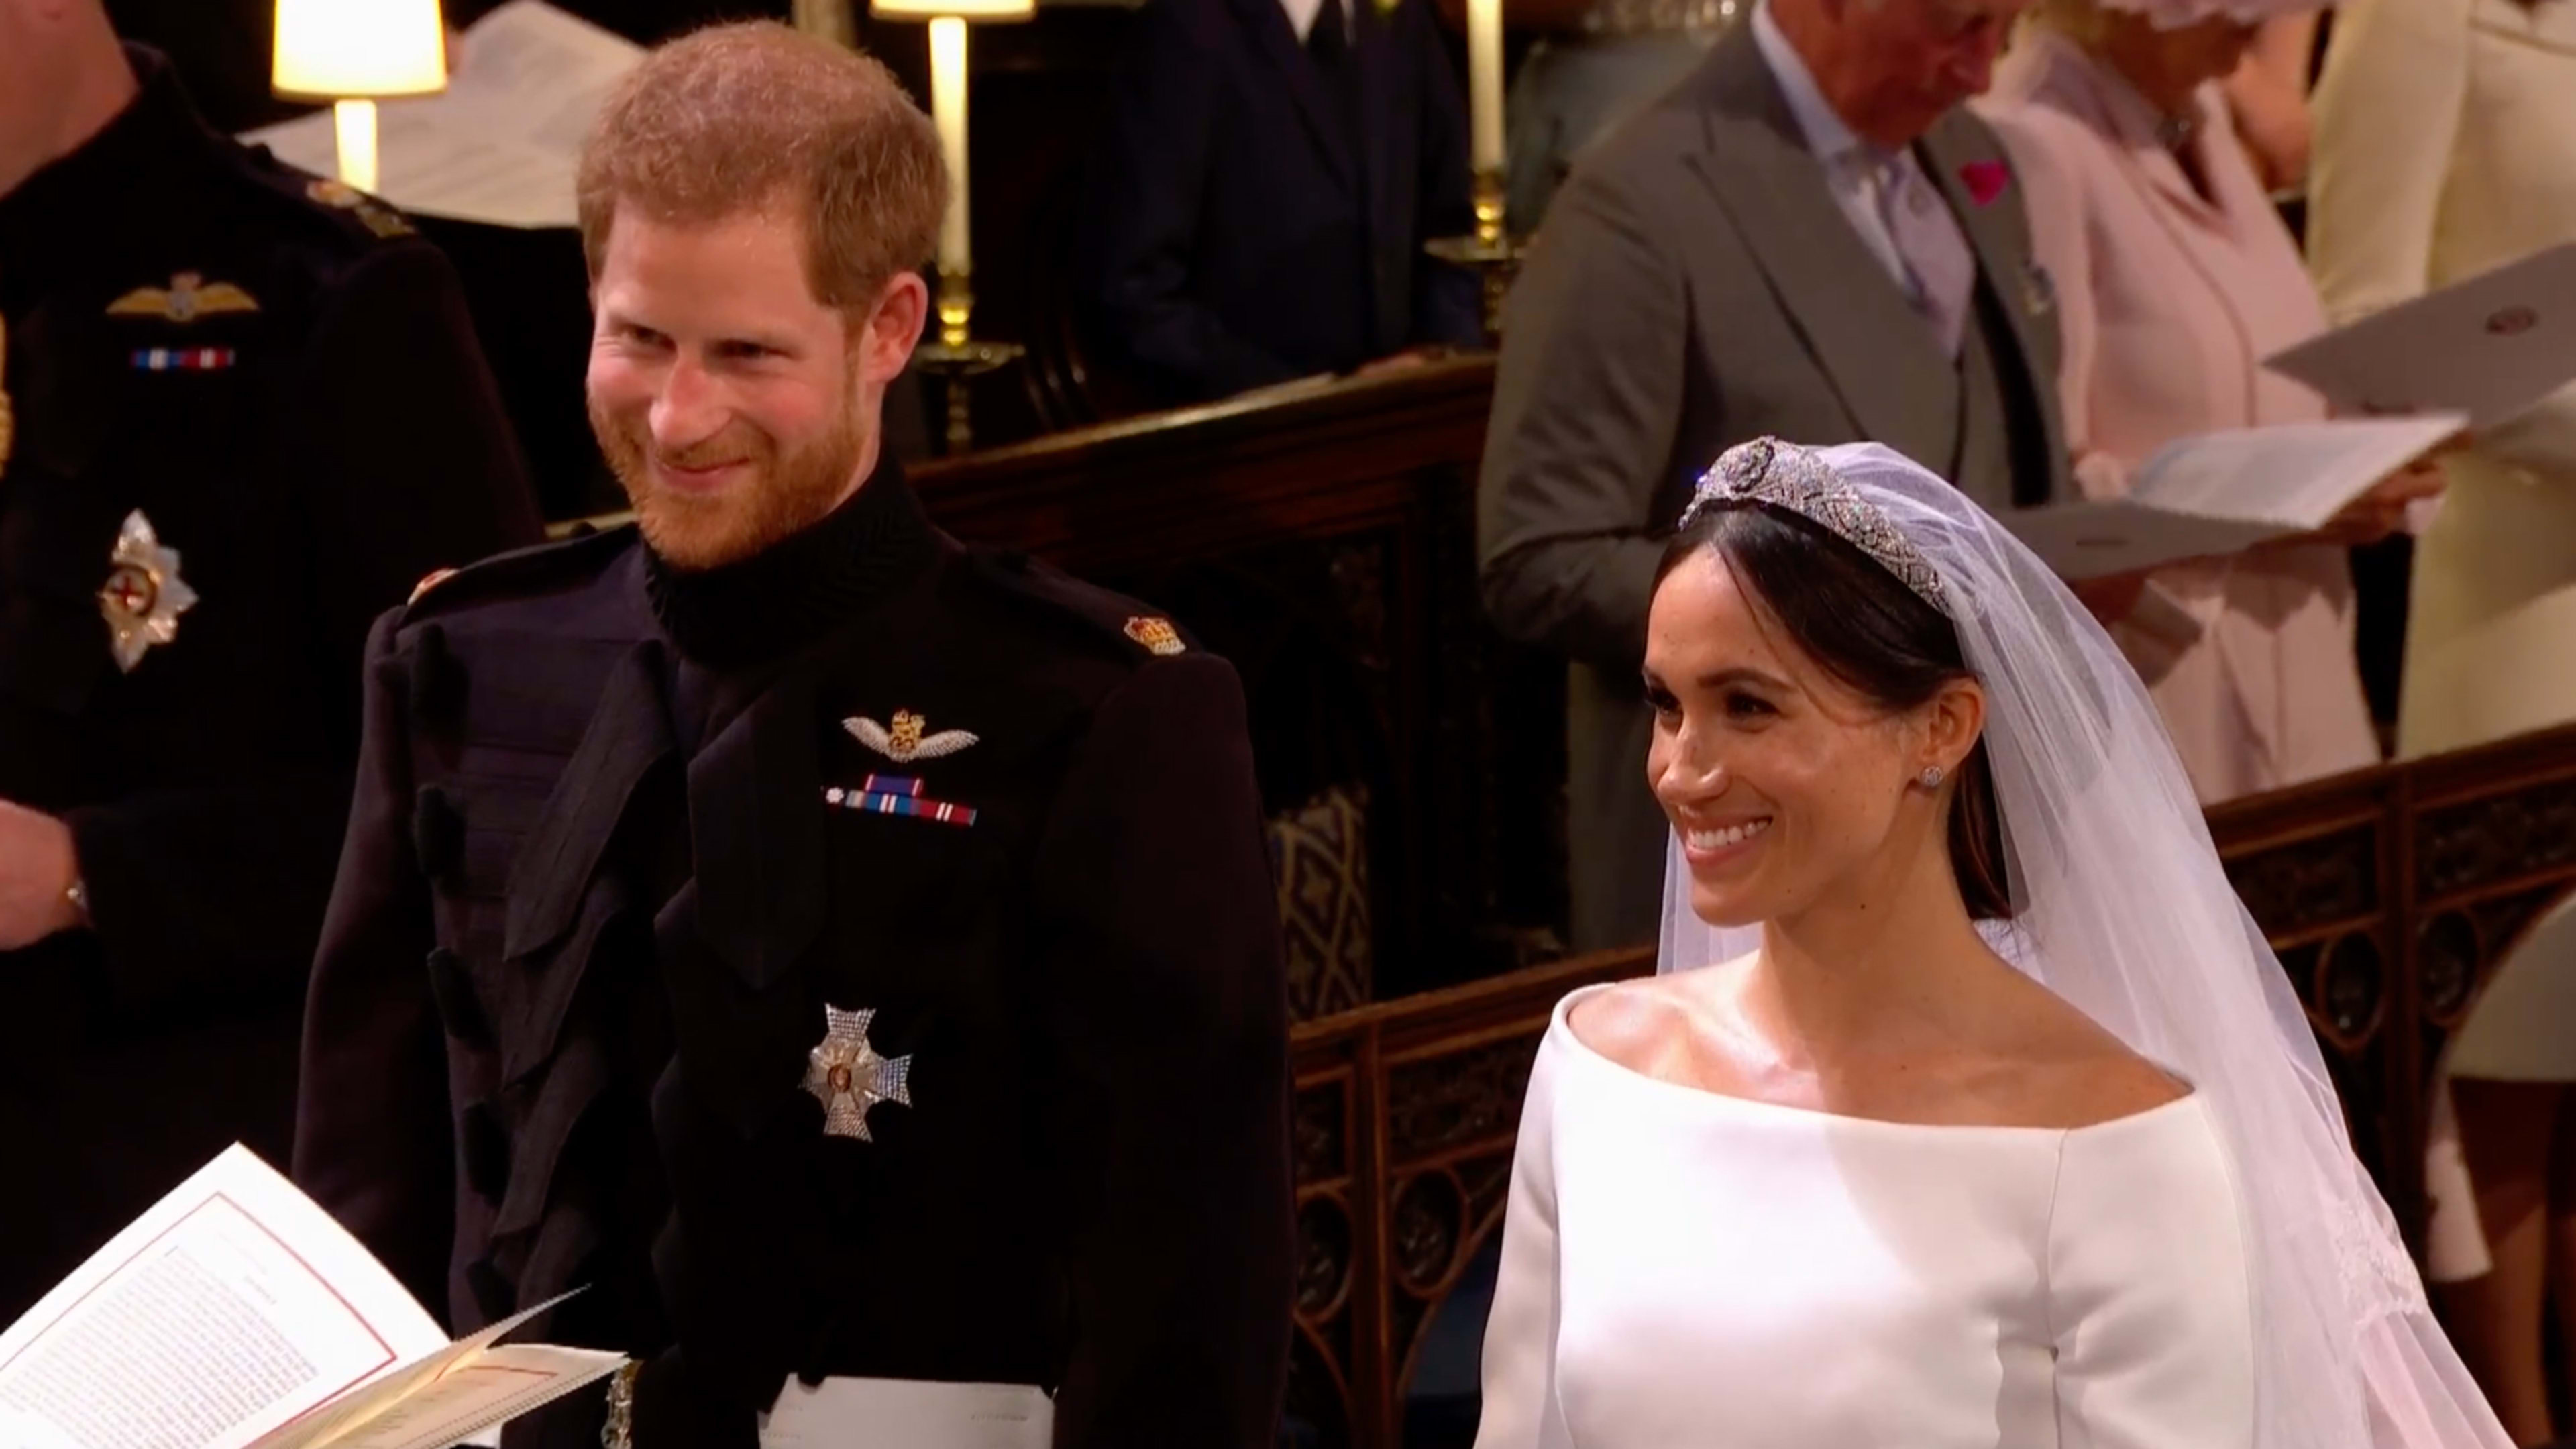 The 10 most memorable moments from Harry and Meghan’s royal wedding